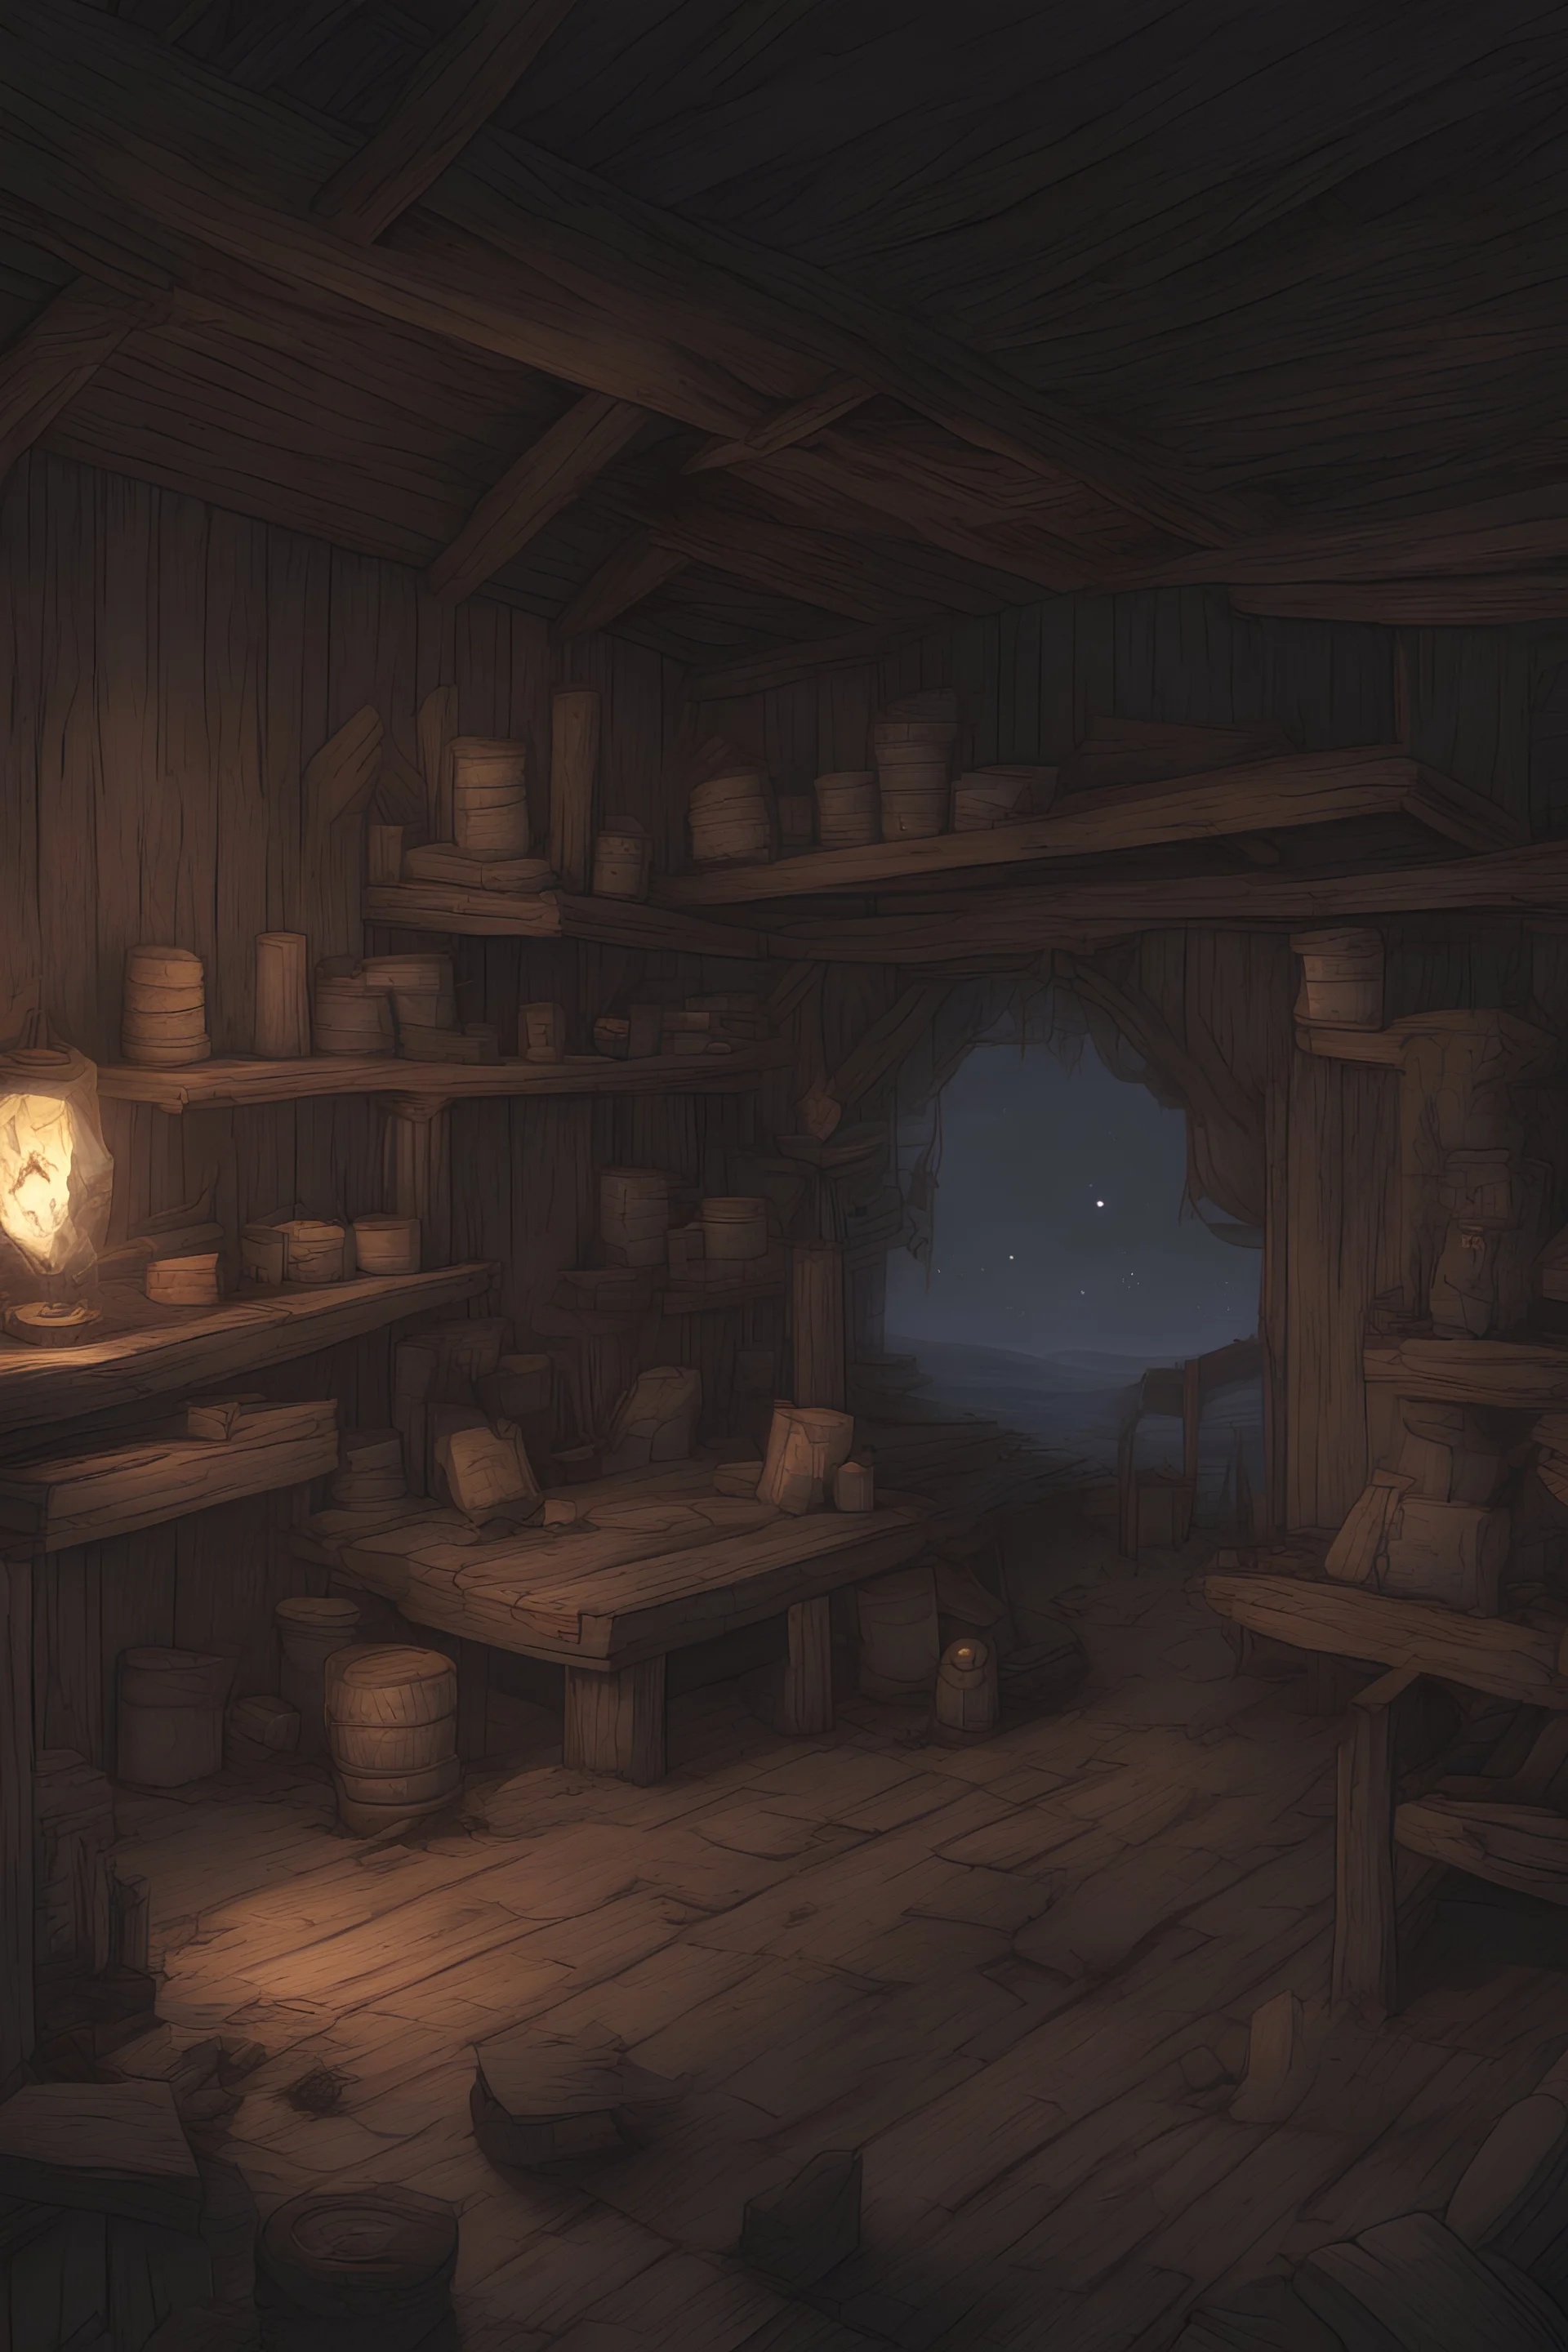 Dnd background, inside of a shack night time